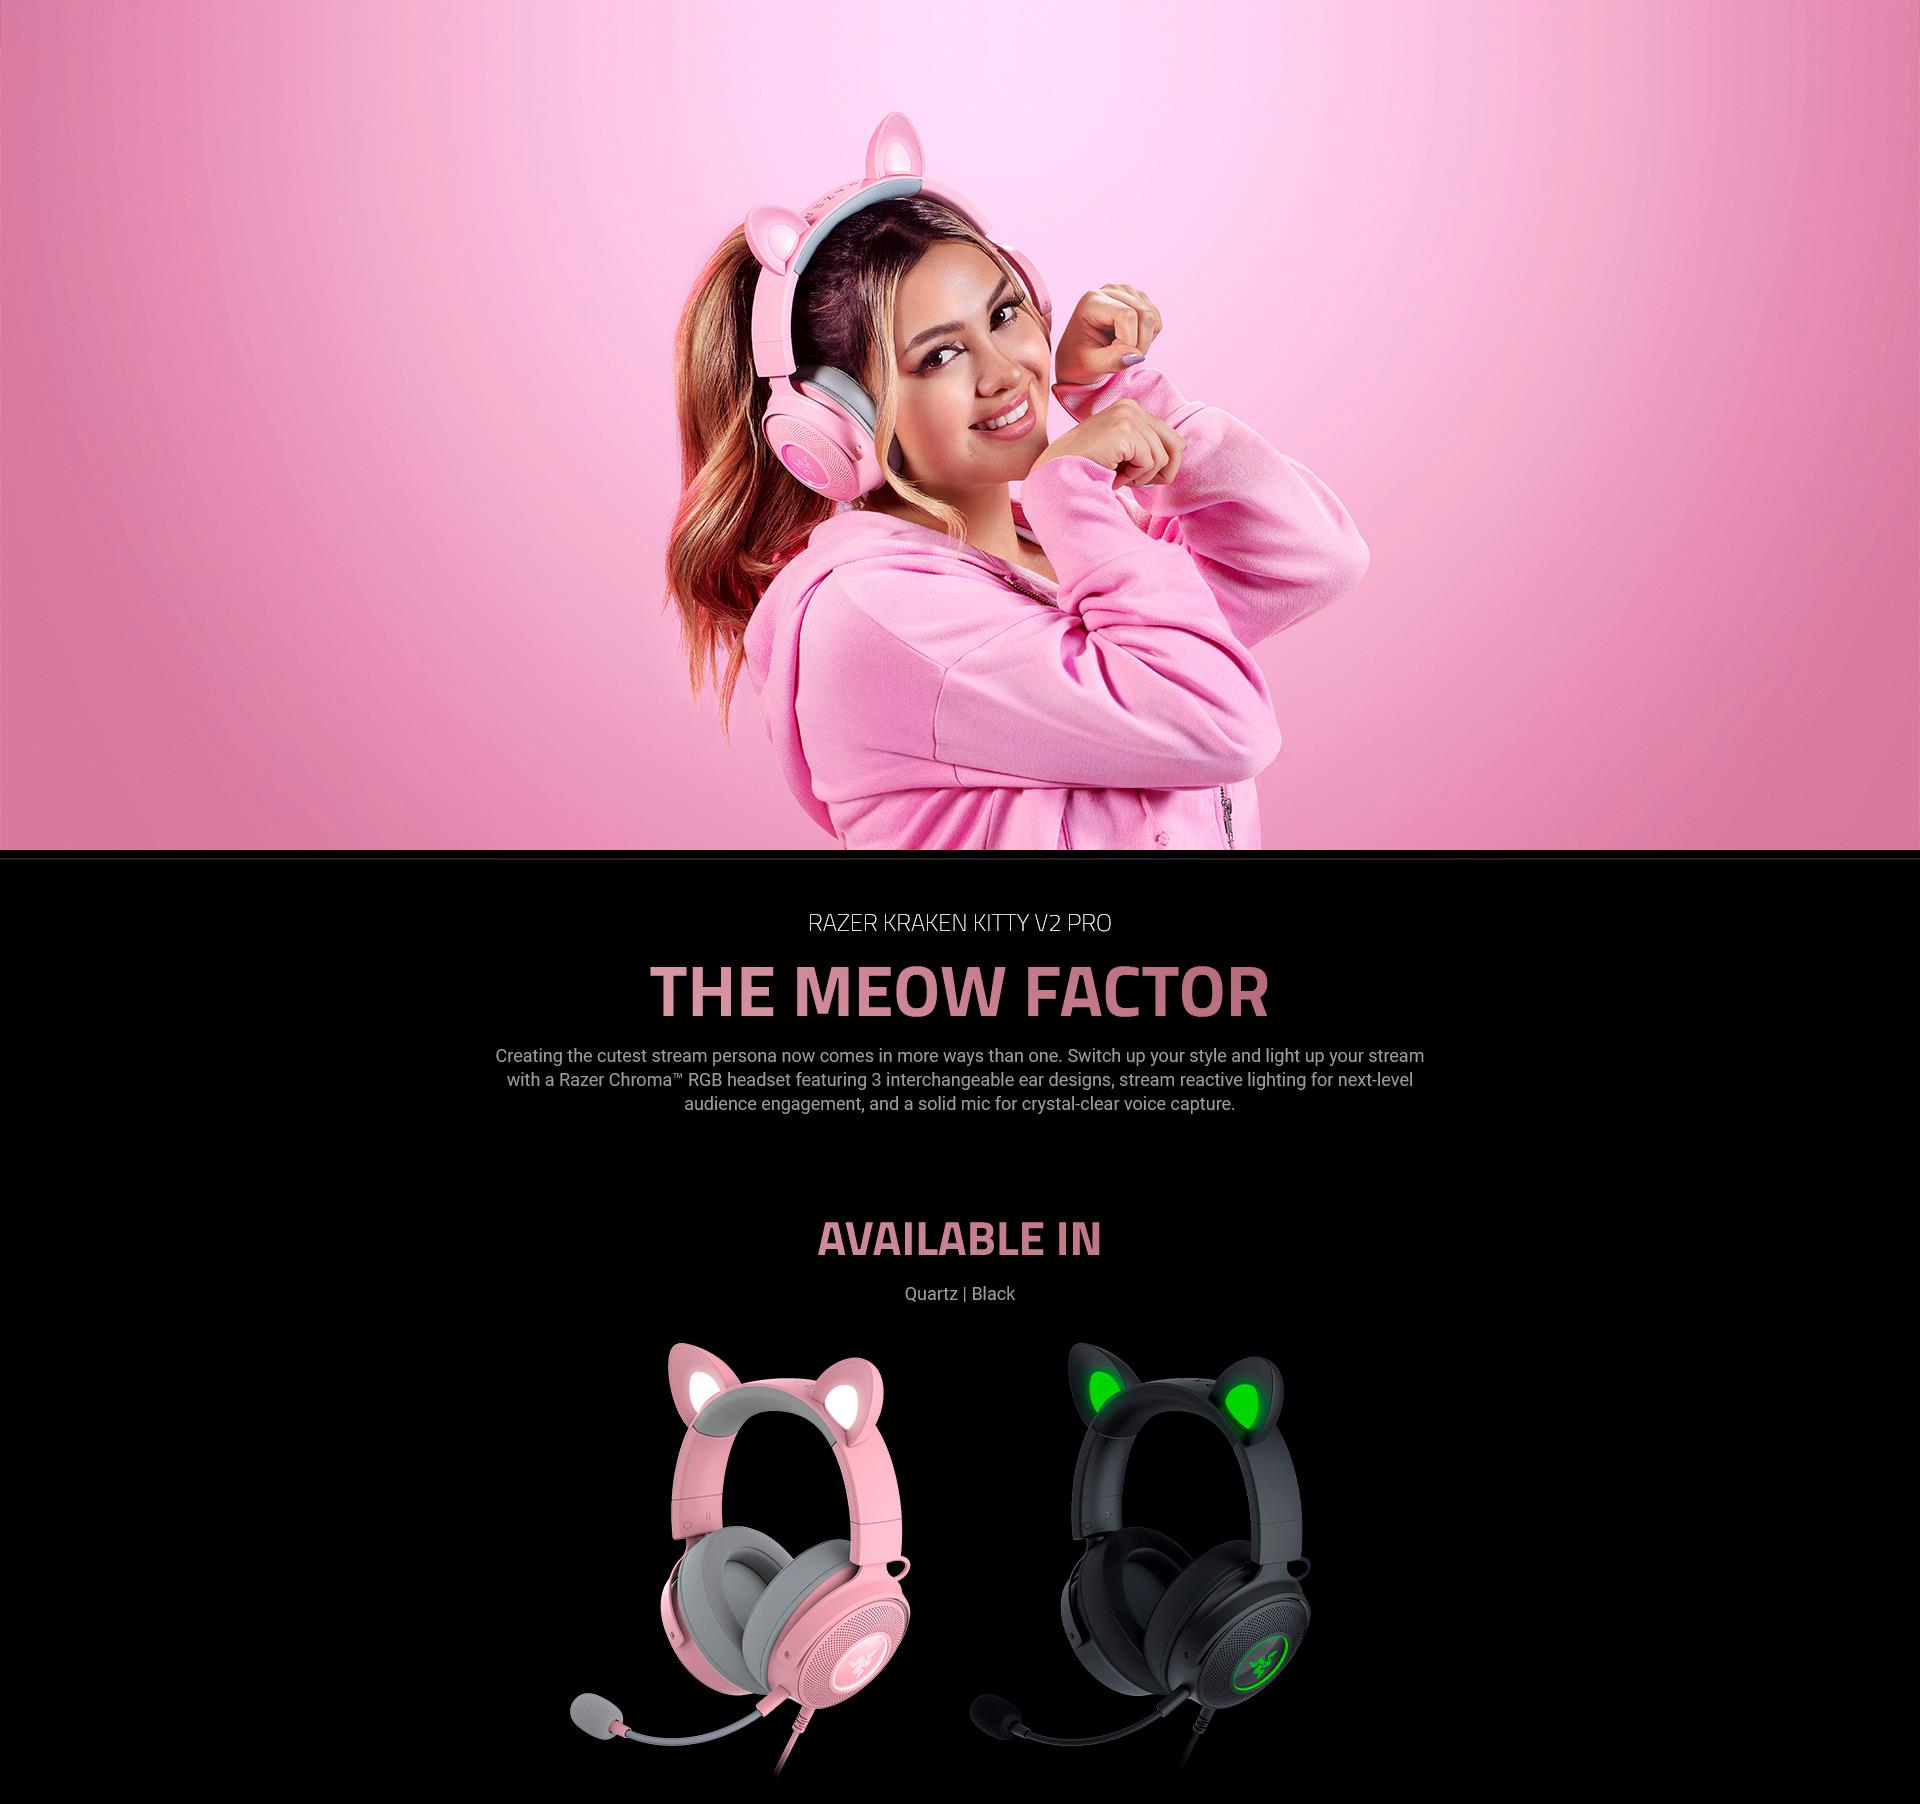 A large marketing image providing additional information about the product Razer Kraken Kitty V2 Pro - Wired RGB Headset with Interchangeable Ears (Quartz Pink) - Additional alt info not provided